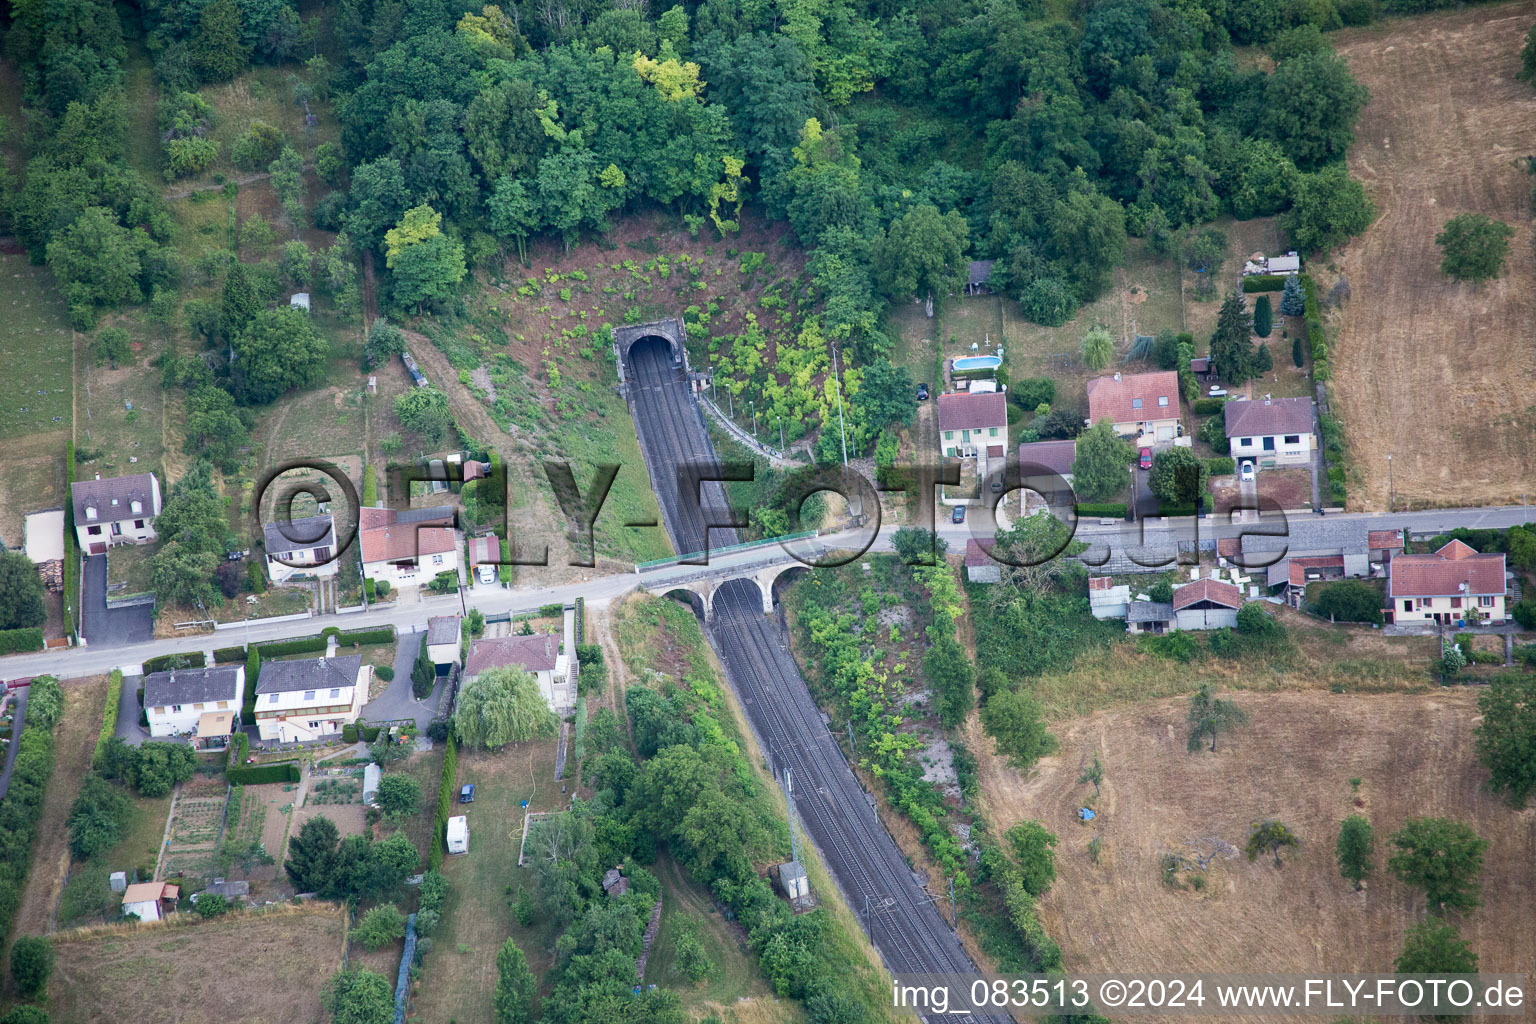 Aerial photograpy of Foug in the state Meurthe et Moselle, France